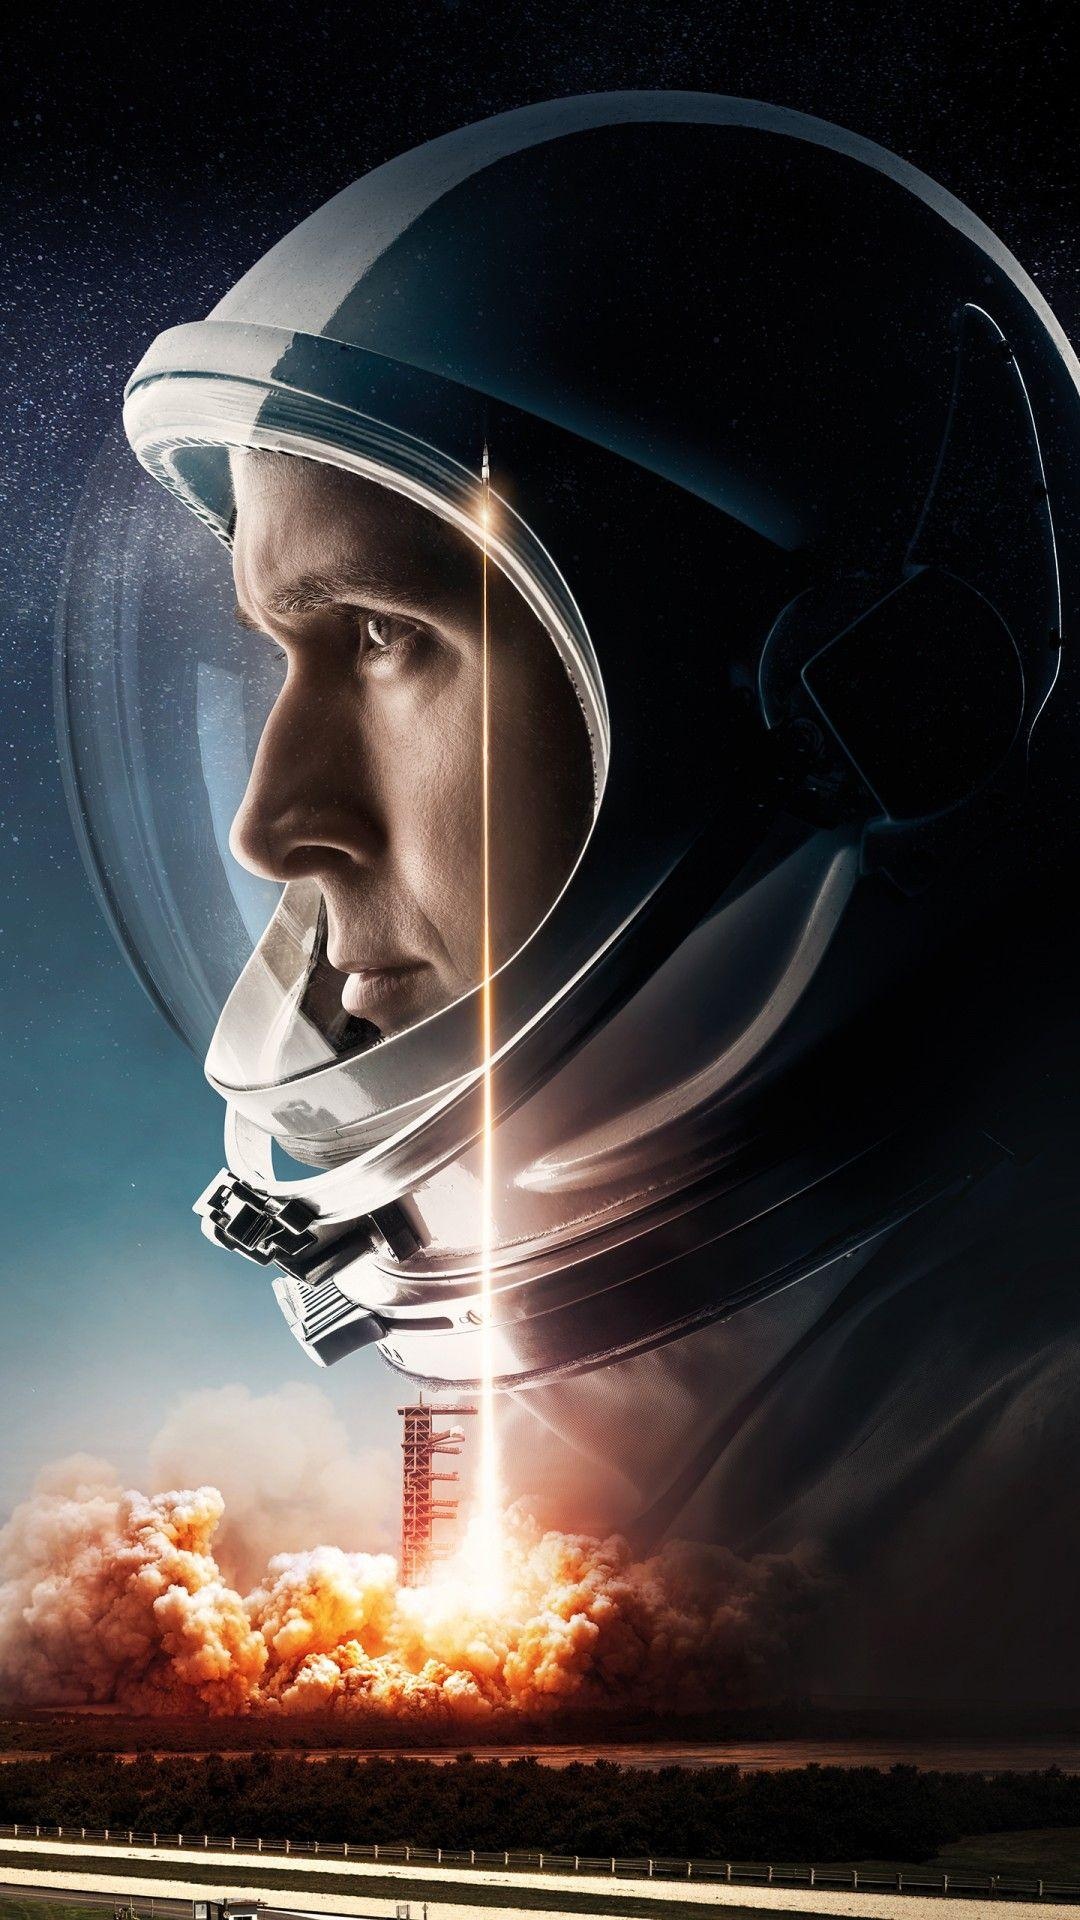 First Man: NASA astronaut, Biopic, Directed by Damien Chazelle. 1080x1920 Full HD Wallpaper.